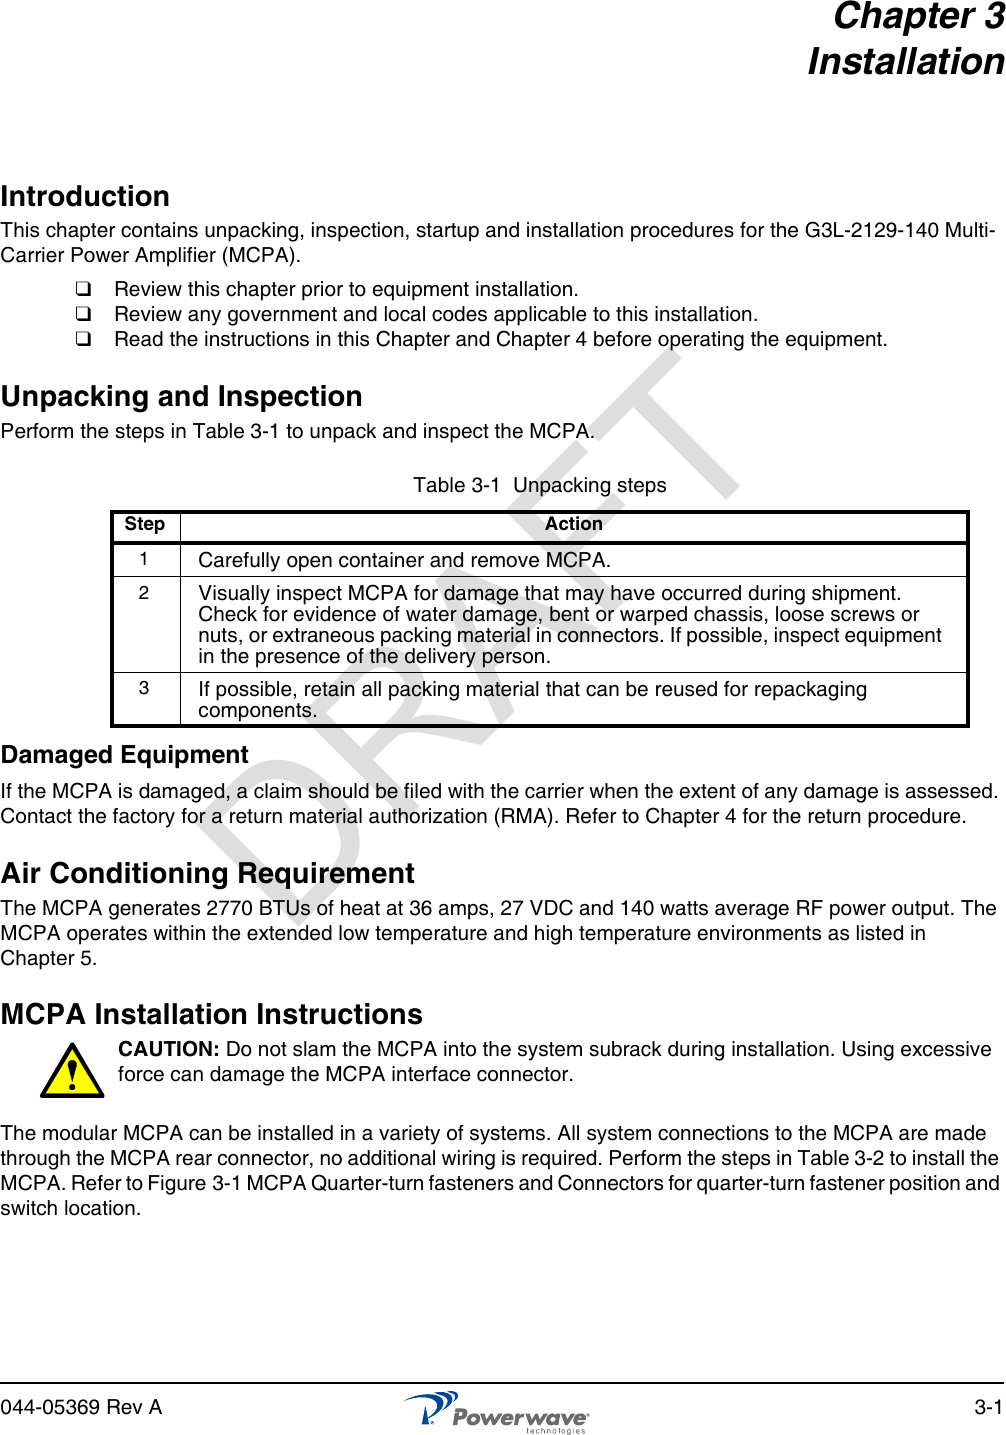 044-05369 Rev A 3-1Chapter 3InstallationIntroductionThis chapter contains unpacking, inspection, startup and installation procedures for the G3L-2129-140 Multi-Carrier Power Amplifier (MCPA).❑  Review this chapter prior to equipment installation.❑  Review any government and local codes applicable to this installation.❑  Read the instructions in this Chapter and Chapter 4 before operating the equipment.Unpacking and InspectionPerform the steps in Table 3-1 to unpack and inspect the MCPA.Damaged EquipmentIf the MCPA is damaged, a claim should be filed with the carrier when the extent of any damage is assessed. Contact the factory for a return material authorization (RMA). Refer to Chapter 4 for the return procedure.Air Conditioning RequirementThe MCPA generates 2770 BTUs of heat at 36 amps, 27 VDC and 140 watts average RF power output. The MCPA operates within the extended low temperature and high temperature environments as listed in Chapter 5.MCPA Installation InstructionsCAUTION: Do not slam the MCPA into the system subrack during installation. Using excessive force can damage the MCPA interface connector.The modular MCPA can be installed in a variety of systems. All system connections to the MCPA are made through the MCPA rear connector, no additional wiring is required. Perform the steps in Table 3-2 to install the MCPA. Refer to Figure 3-1 MCPA Quarter-turn fasteners and Connectors for quarter-turn fastener position and switch location.Table 3-1  Unpacking stepsStep Action1Carefully open container and remove MCPA.2Visually inspect MCPA for damage that may have occurred during shipment. Check for evidence of water damage, bent or warped chassis, loose screws or nuts, or extraneous packing material in connectors. If possible, inspect equipment in the presence of the delivery person.3If possible, retain all packing material that can be reused for repackaging components.DRAFT